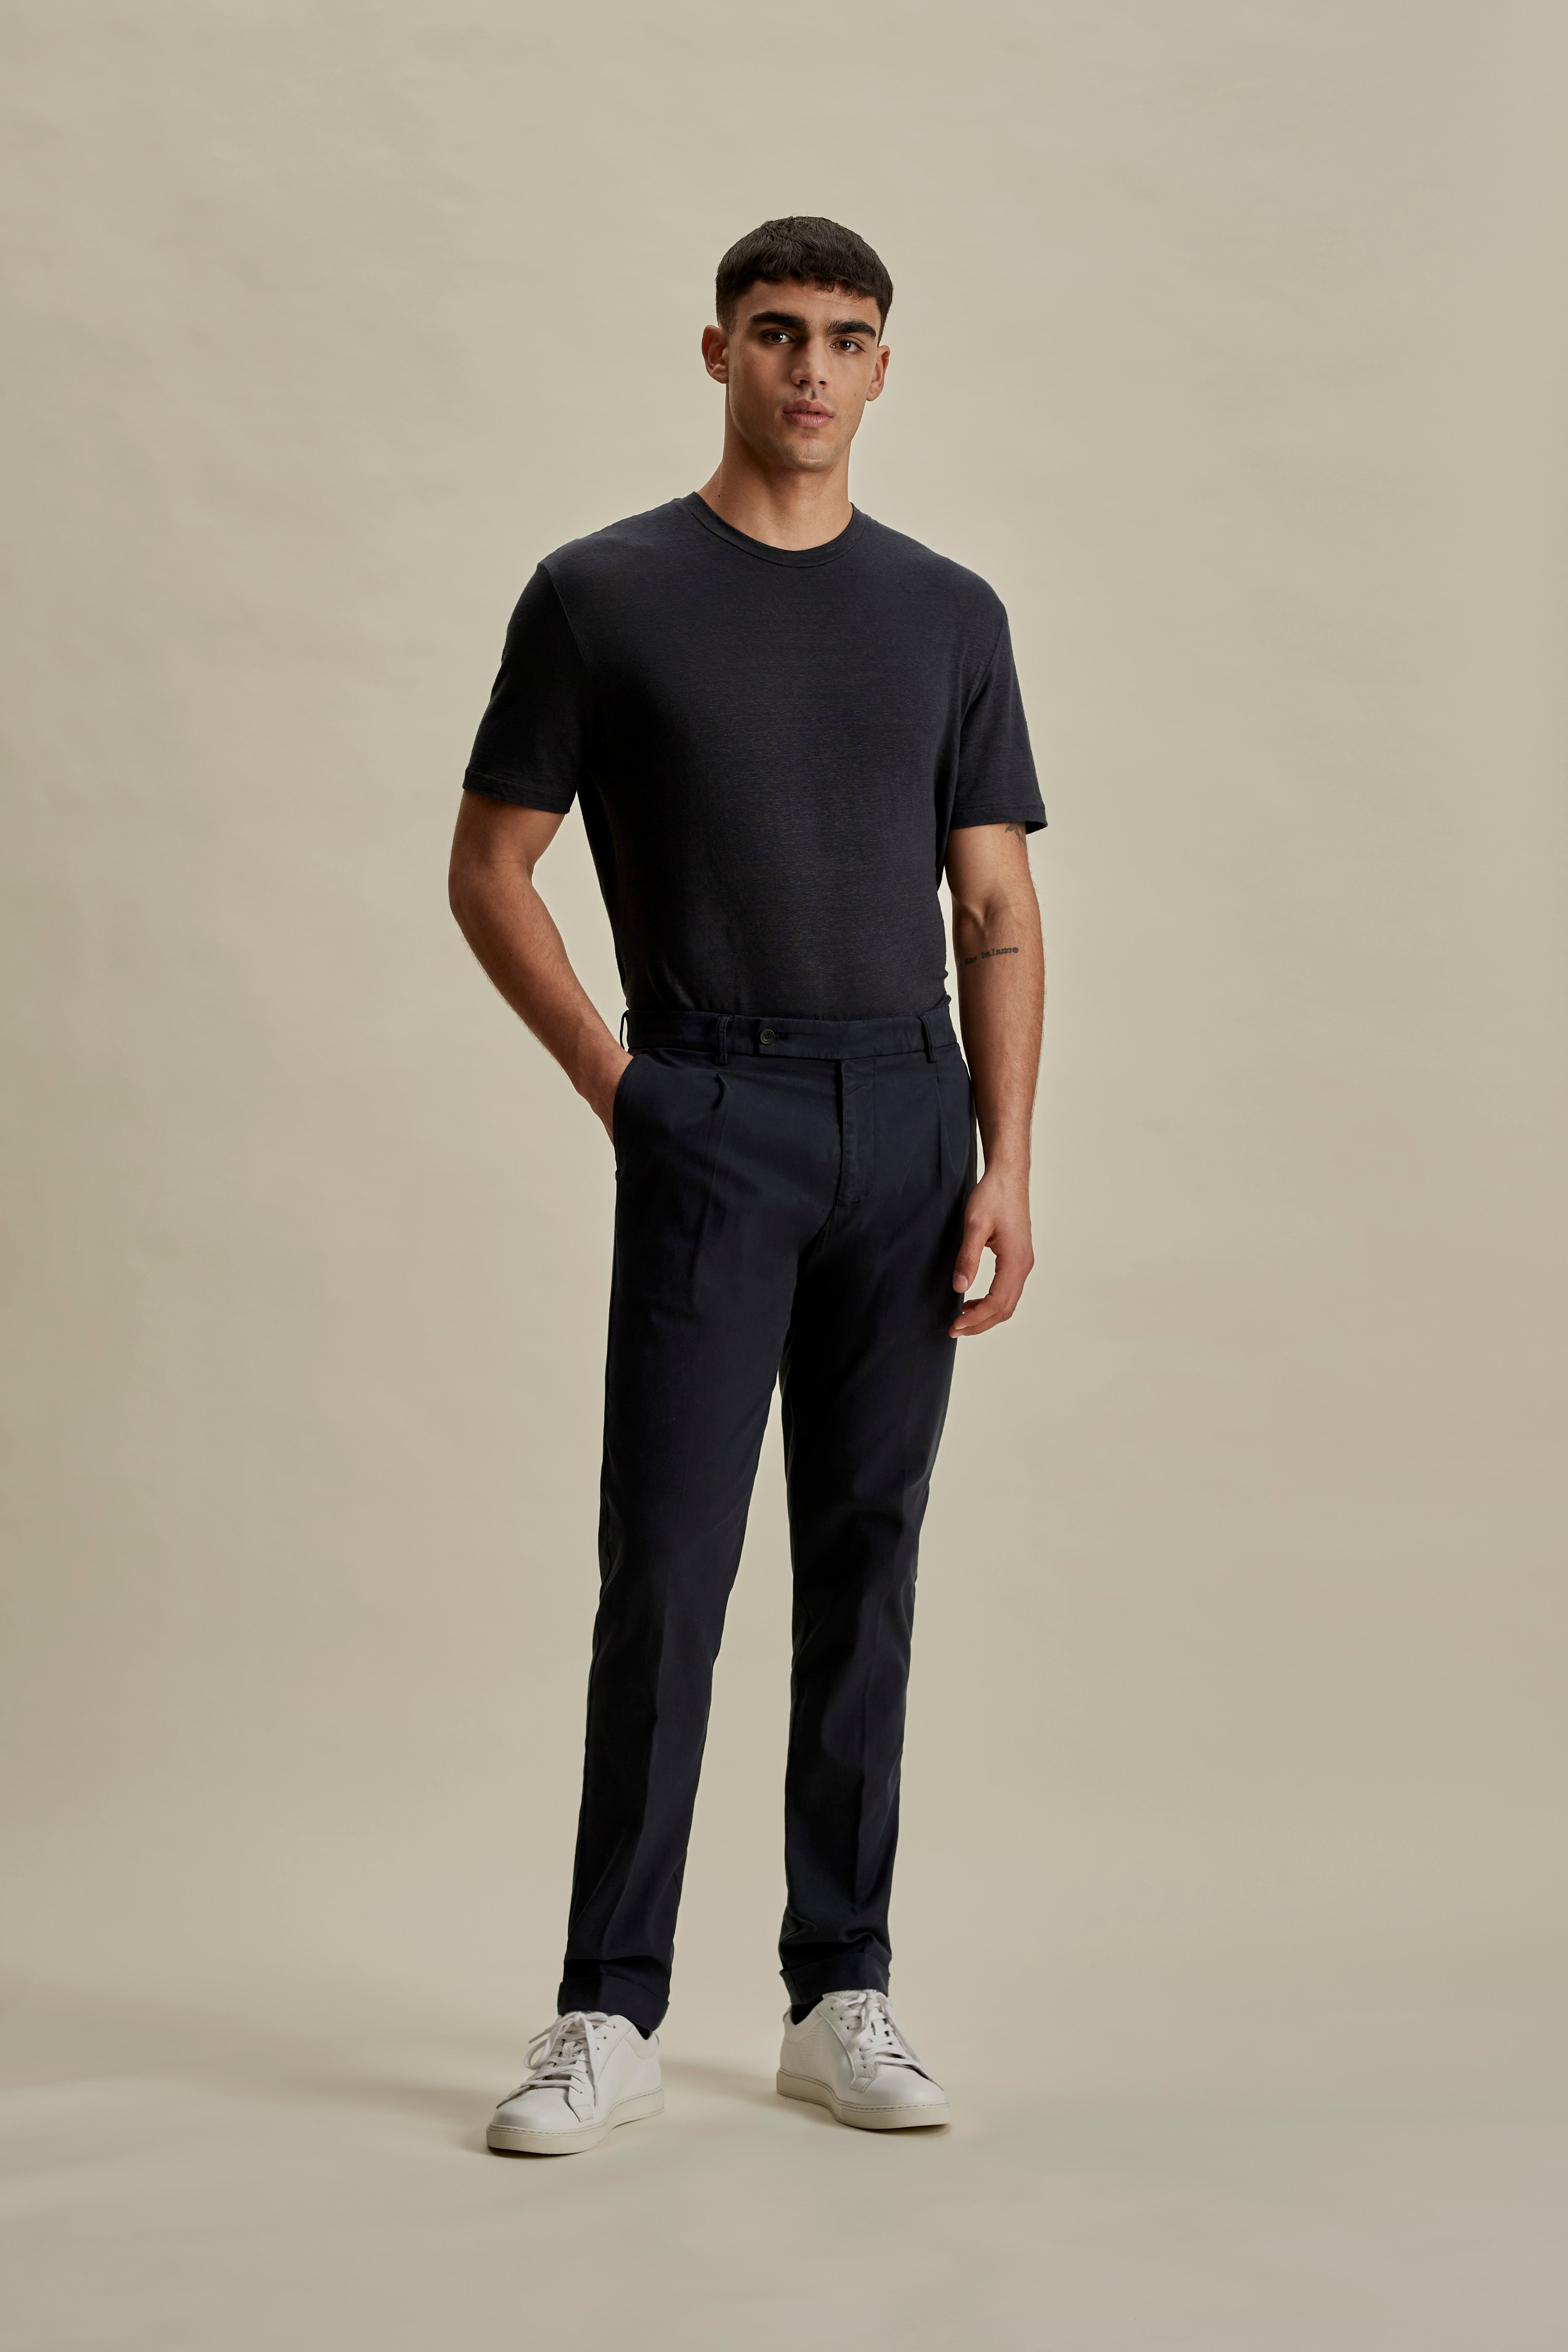 Cotton Easy Fit Flat Front Chinos Navy Full Length Model Image